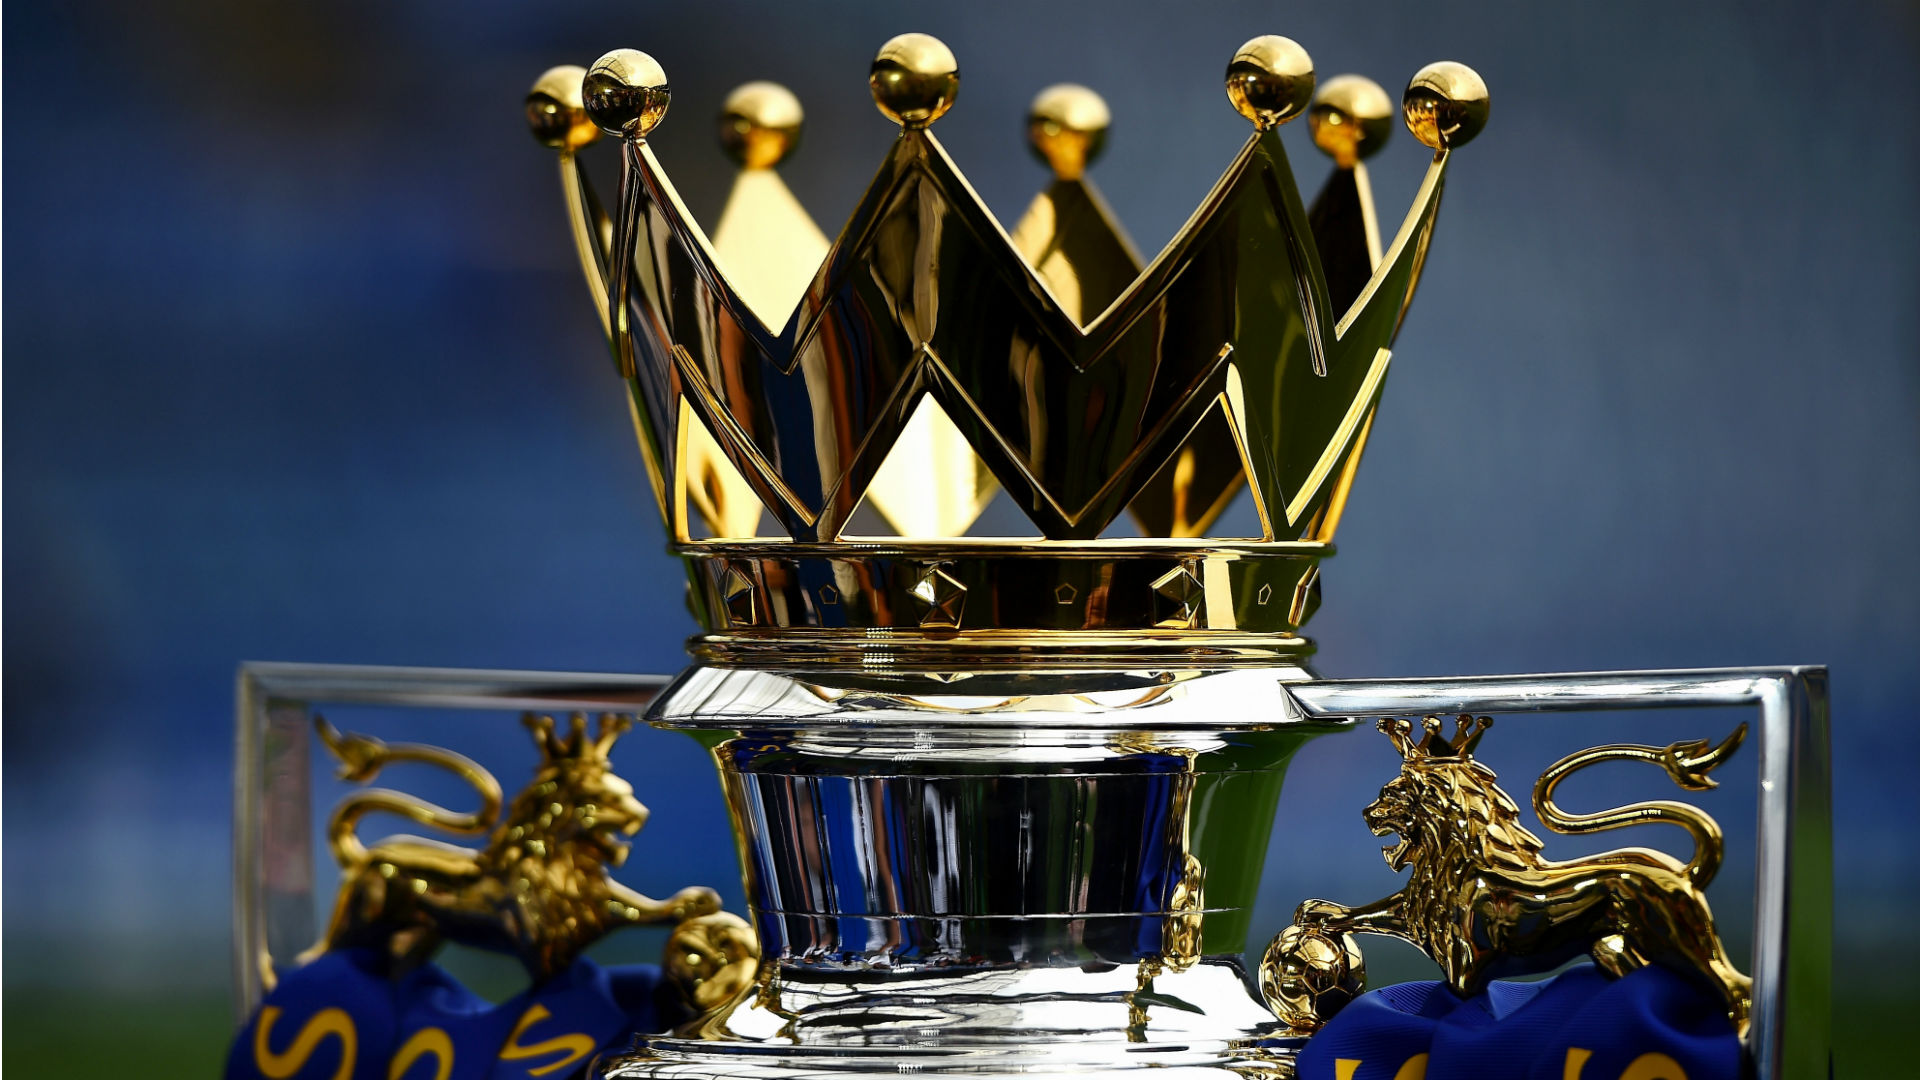 Premier League chiefs confused on who to give fake trophy to